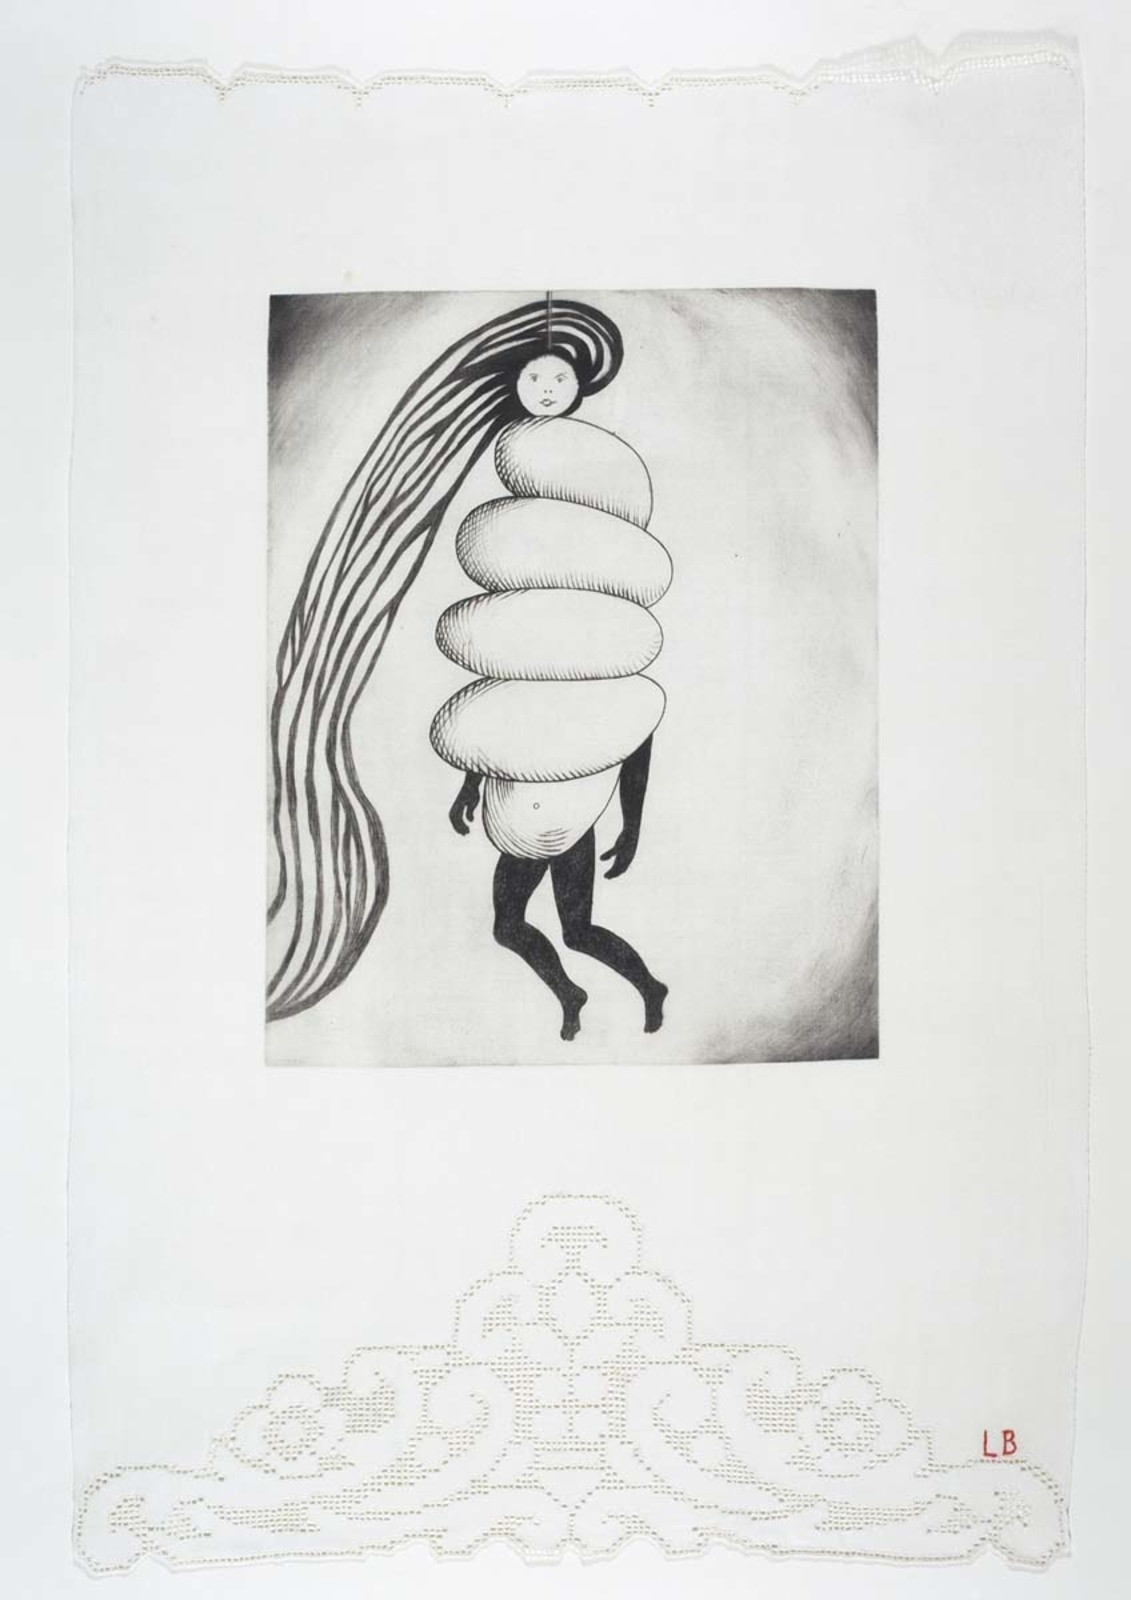 _Spiral Woman,_ 2002. Drypoint and engraving, with selective wiping, on fabric. Collection Harlan & Weaver, Inc., New York. © 2017 The Easton Foundation/Licensed by VAGA, NY. LN2017.758